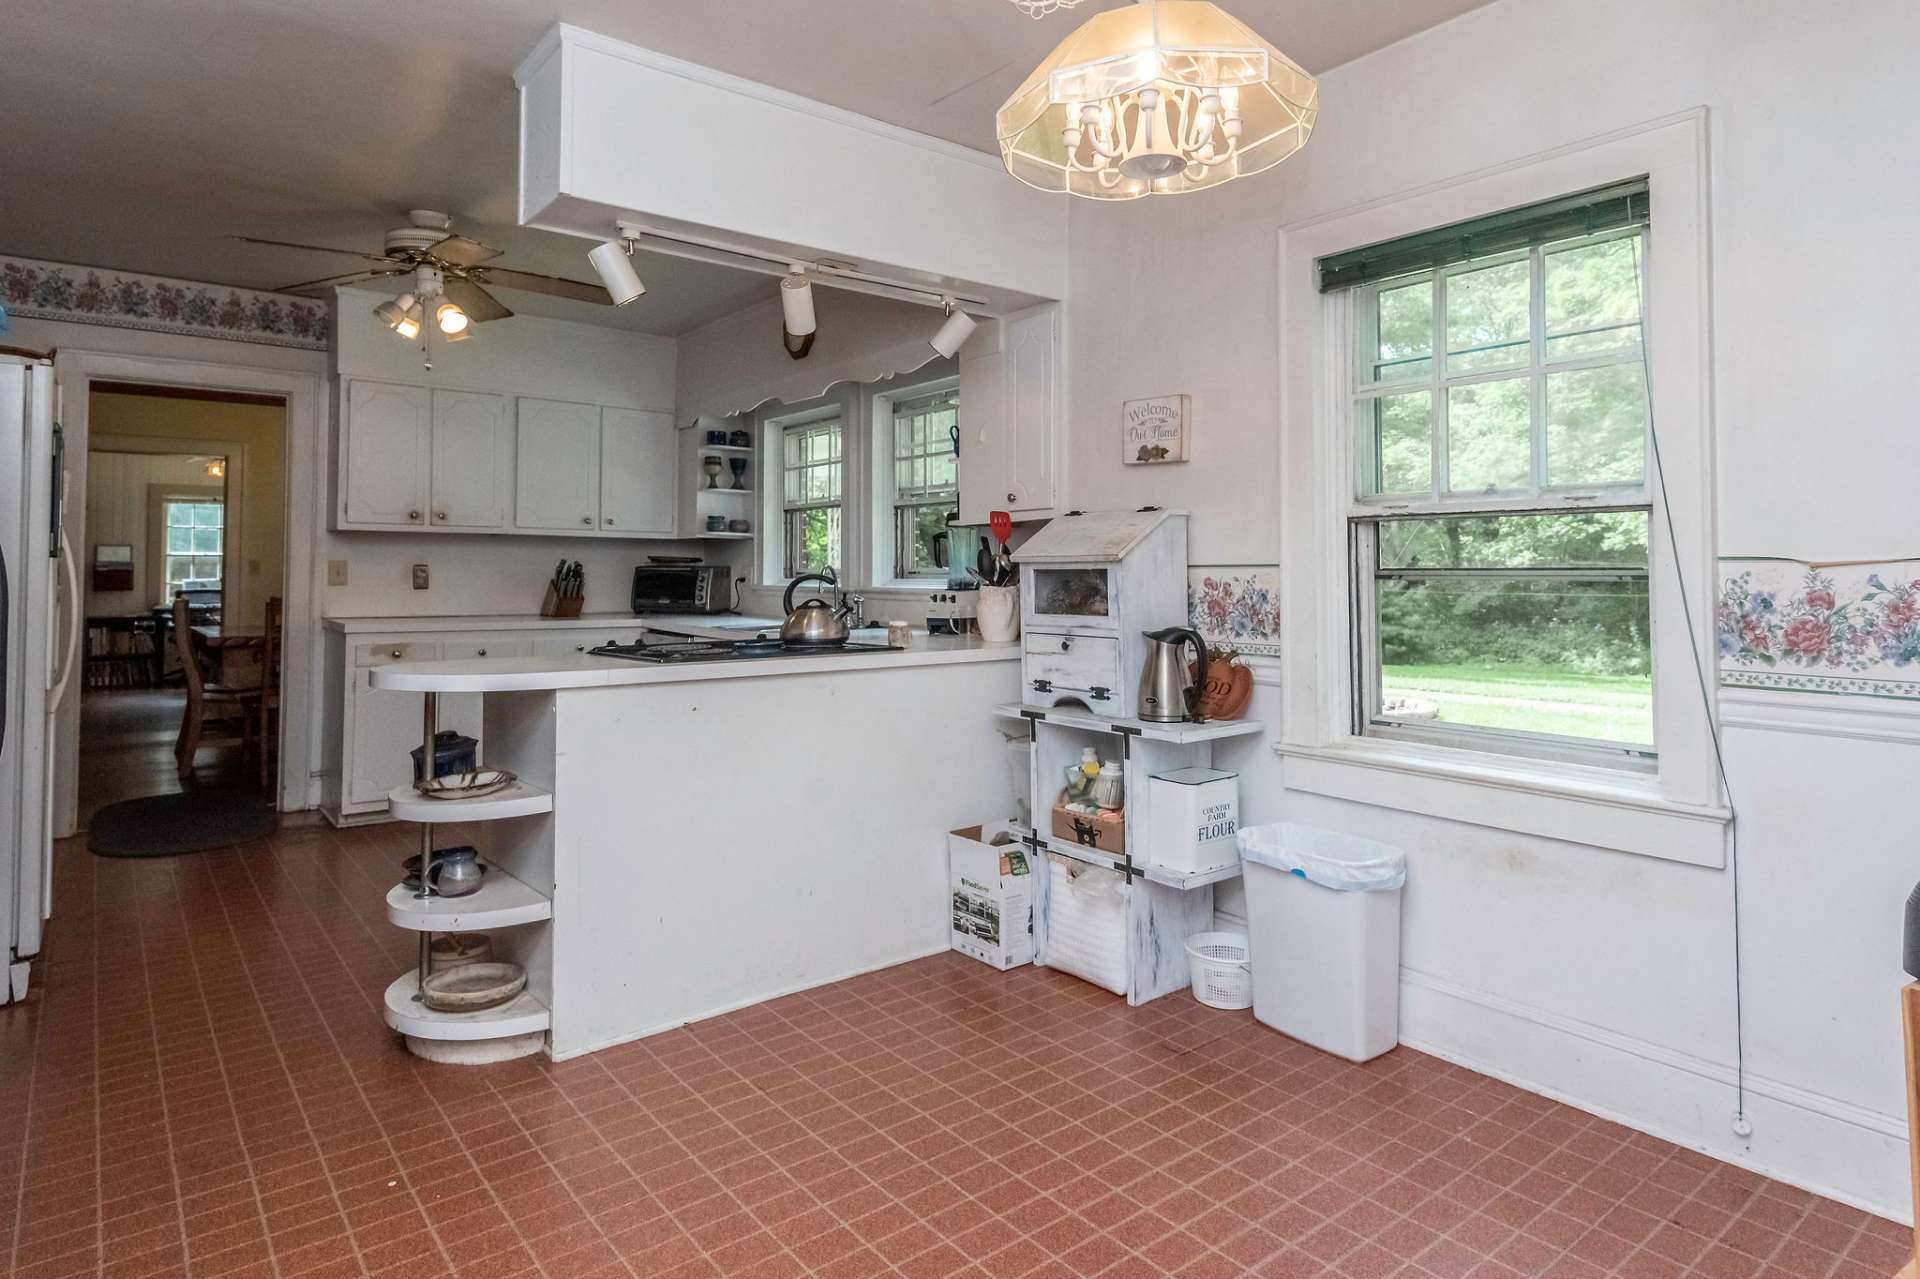 Kitchen offers a breakfast nook or an area for informal dining.